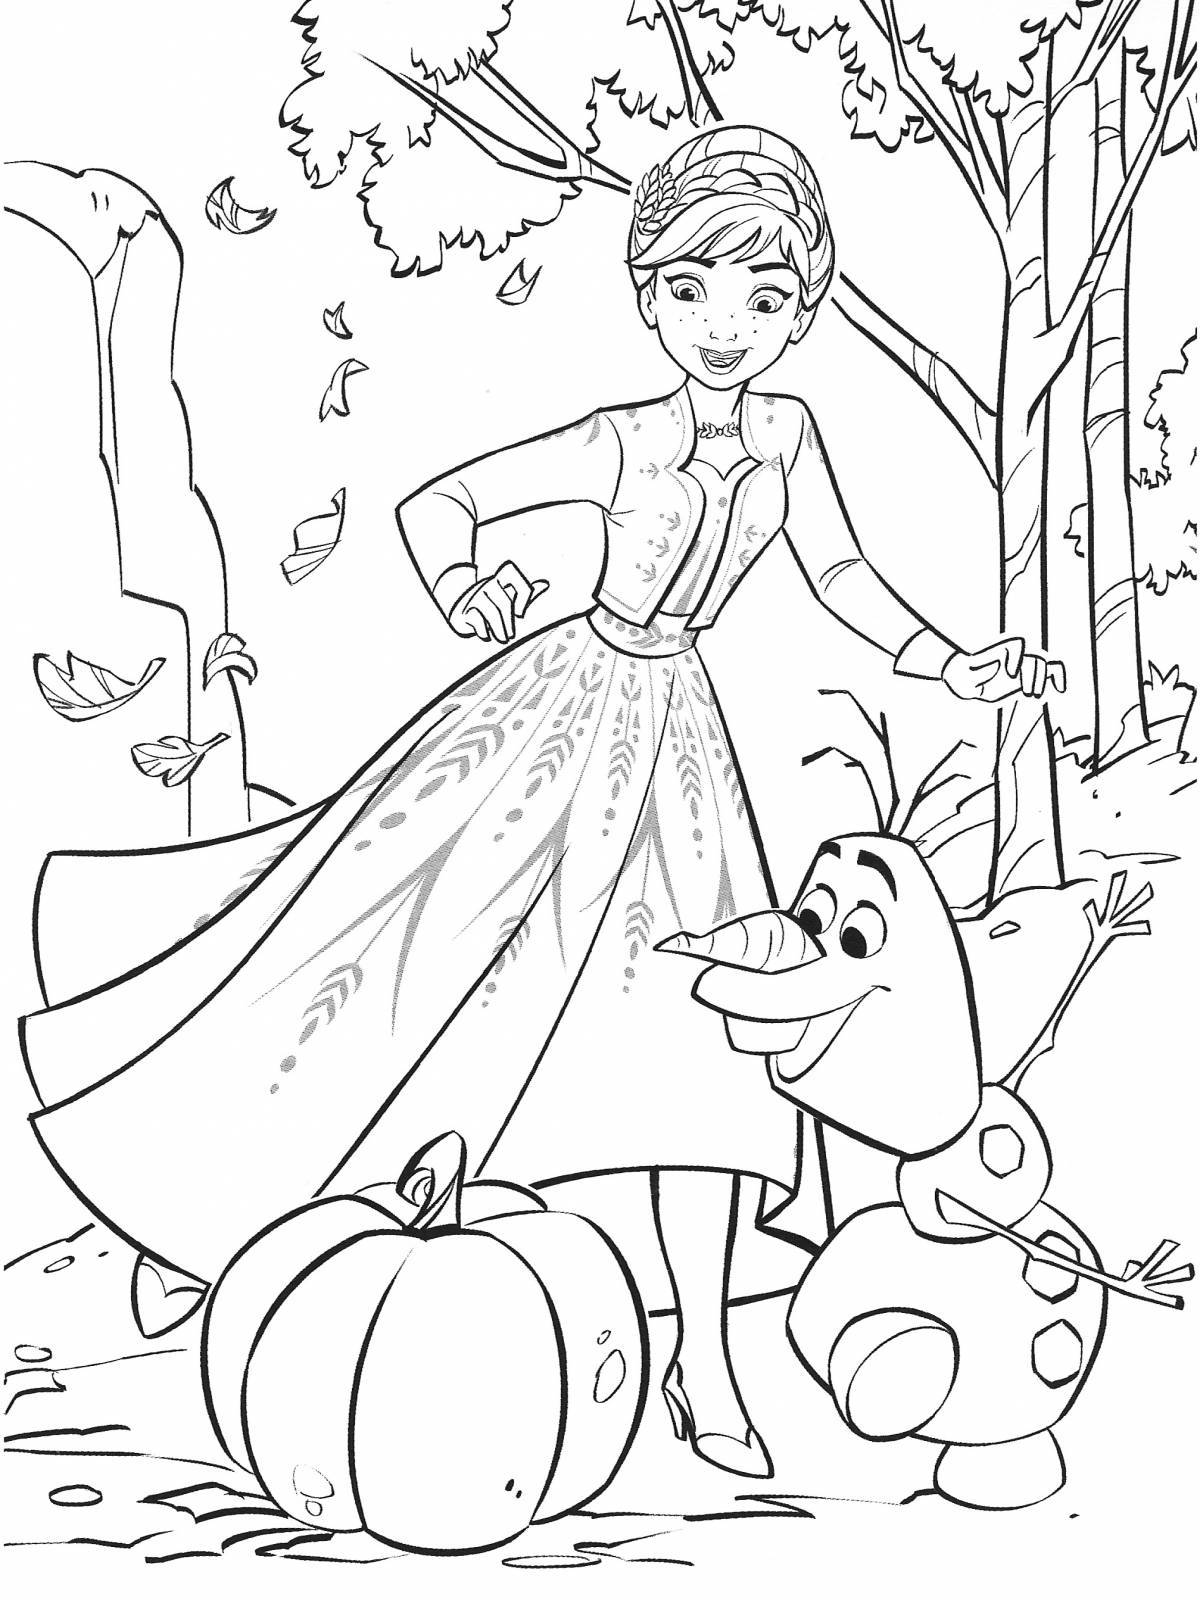 Great Frozen coloring book for kids